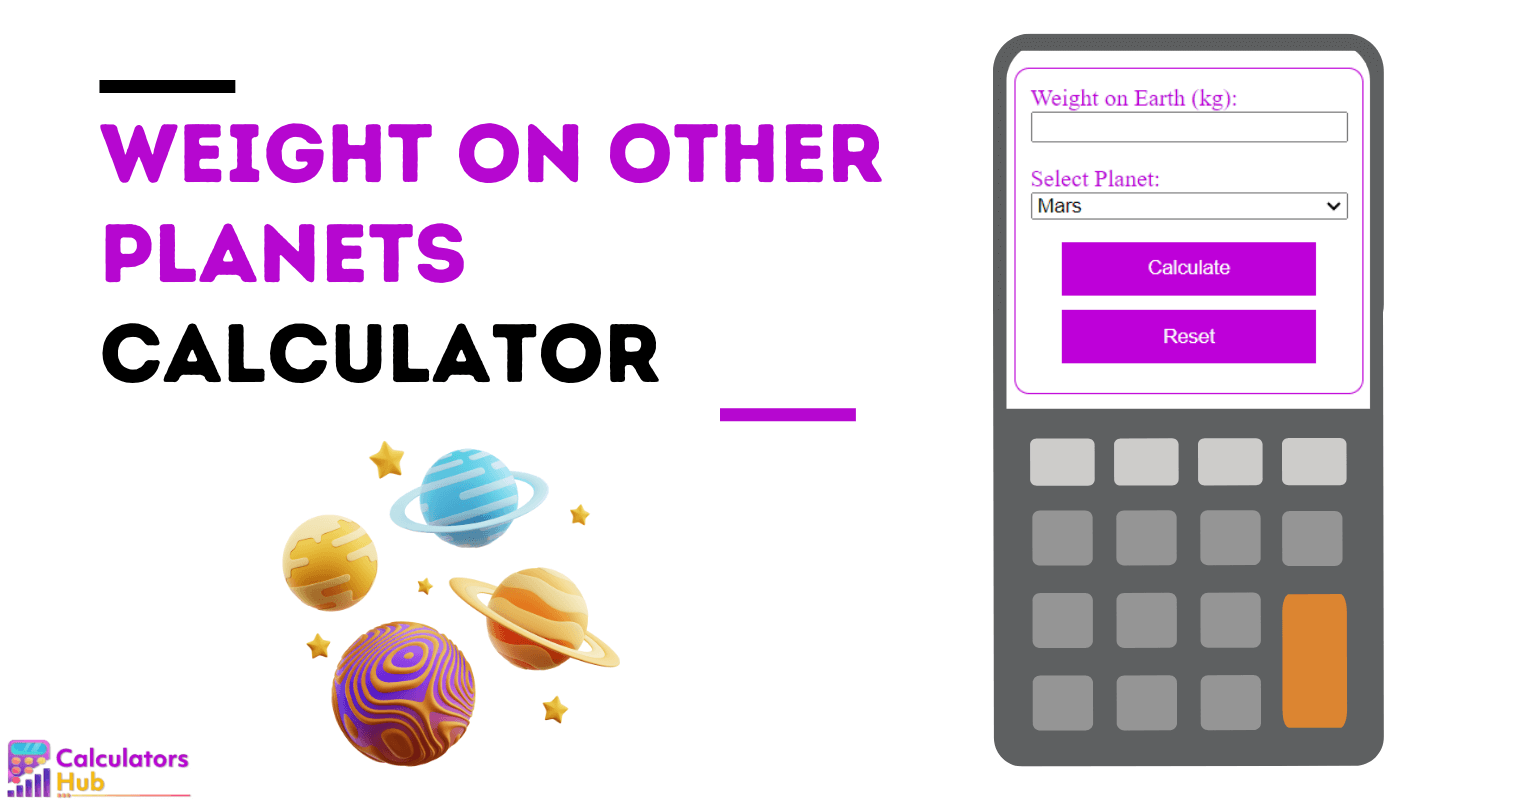 Weight on Other Planets Calculator